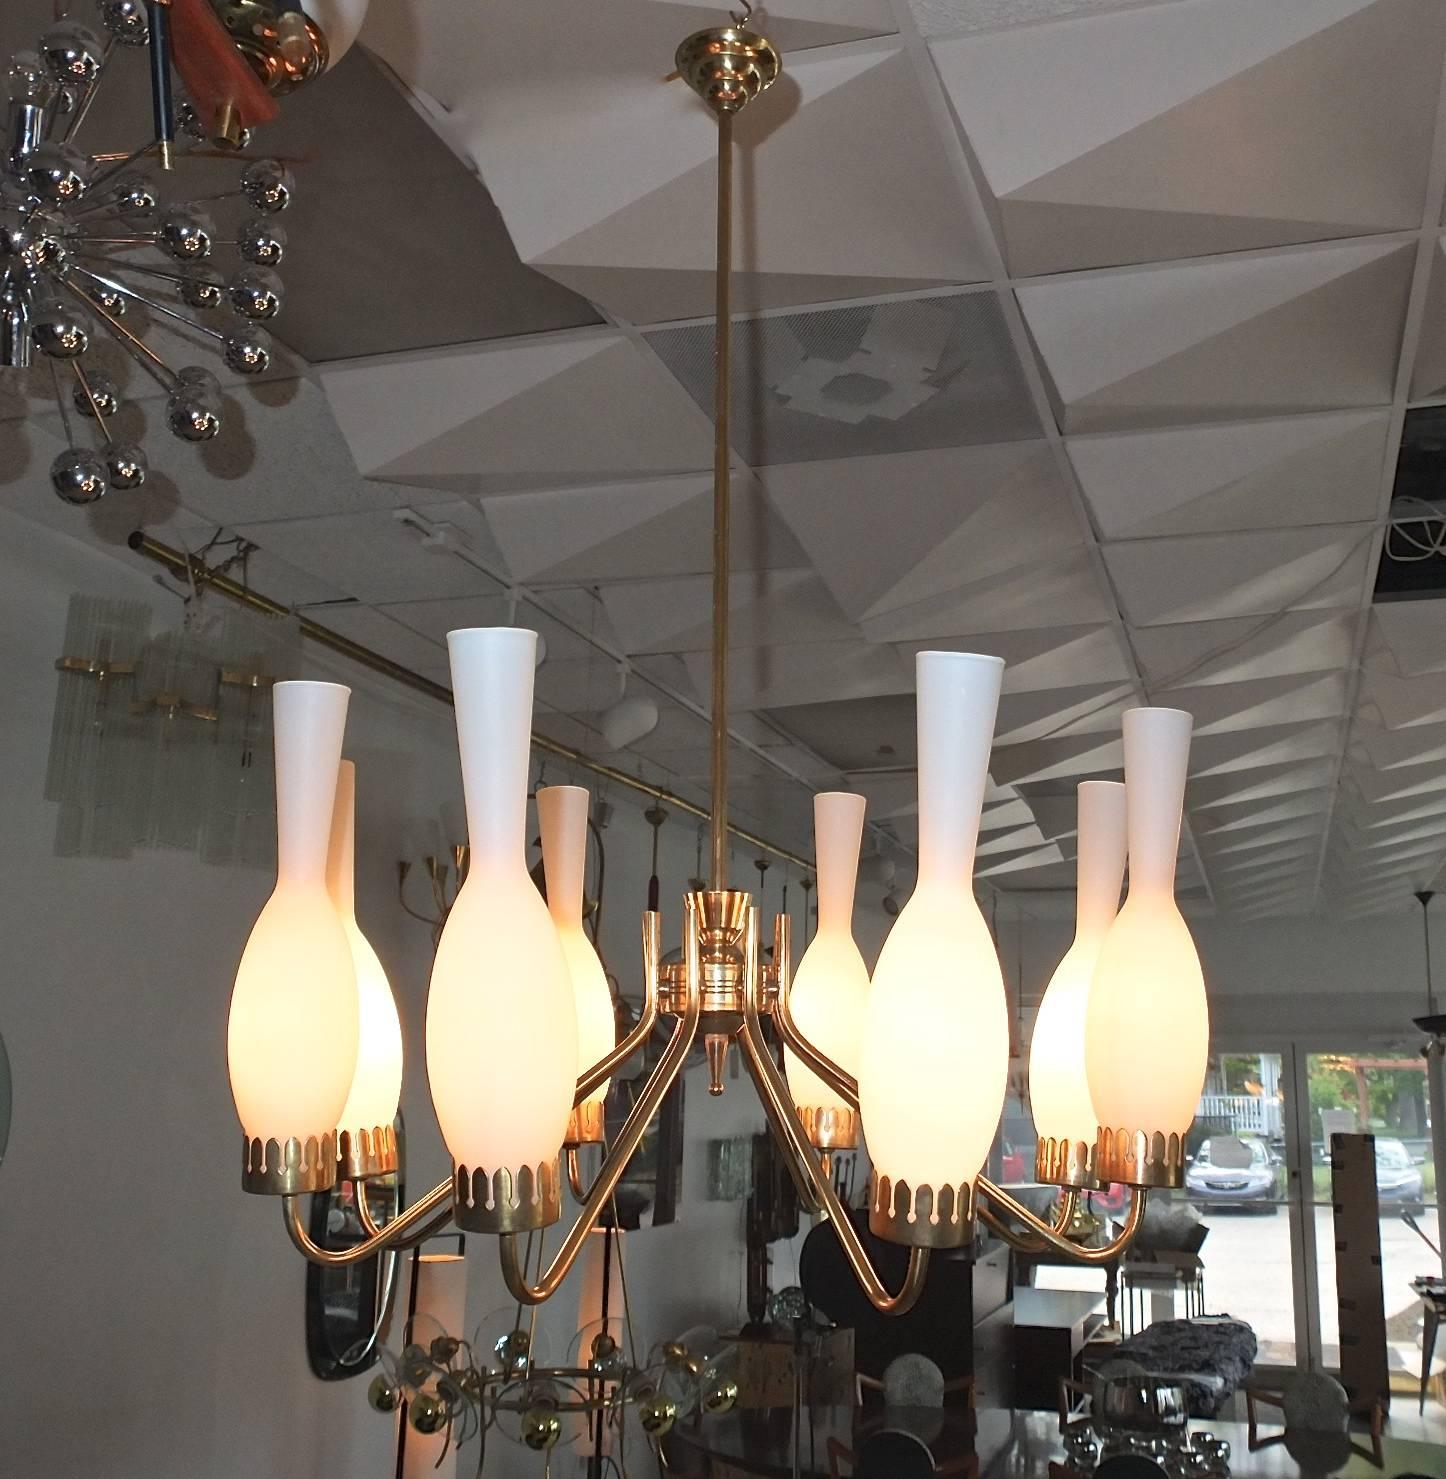 1950s Italian brass eight-arm chandelier with eight bottles or bowling pin shaped opaline glass globes, each one illuminated with a single candelabra size bulb. Rewired. We can lengthen or shorten the stem per request.

Measures: 23 inches